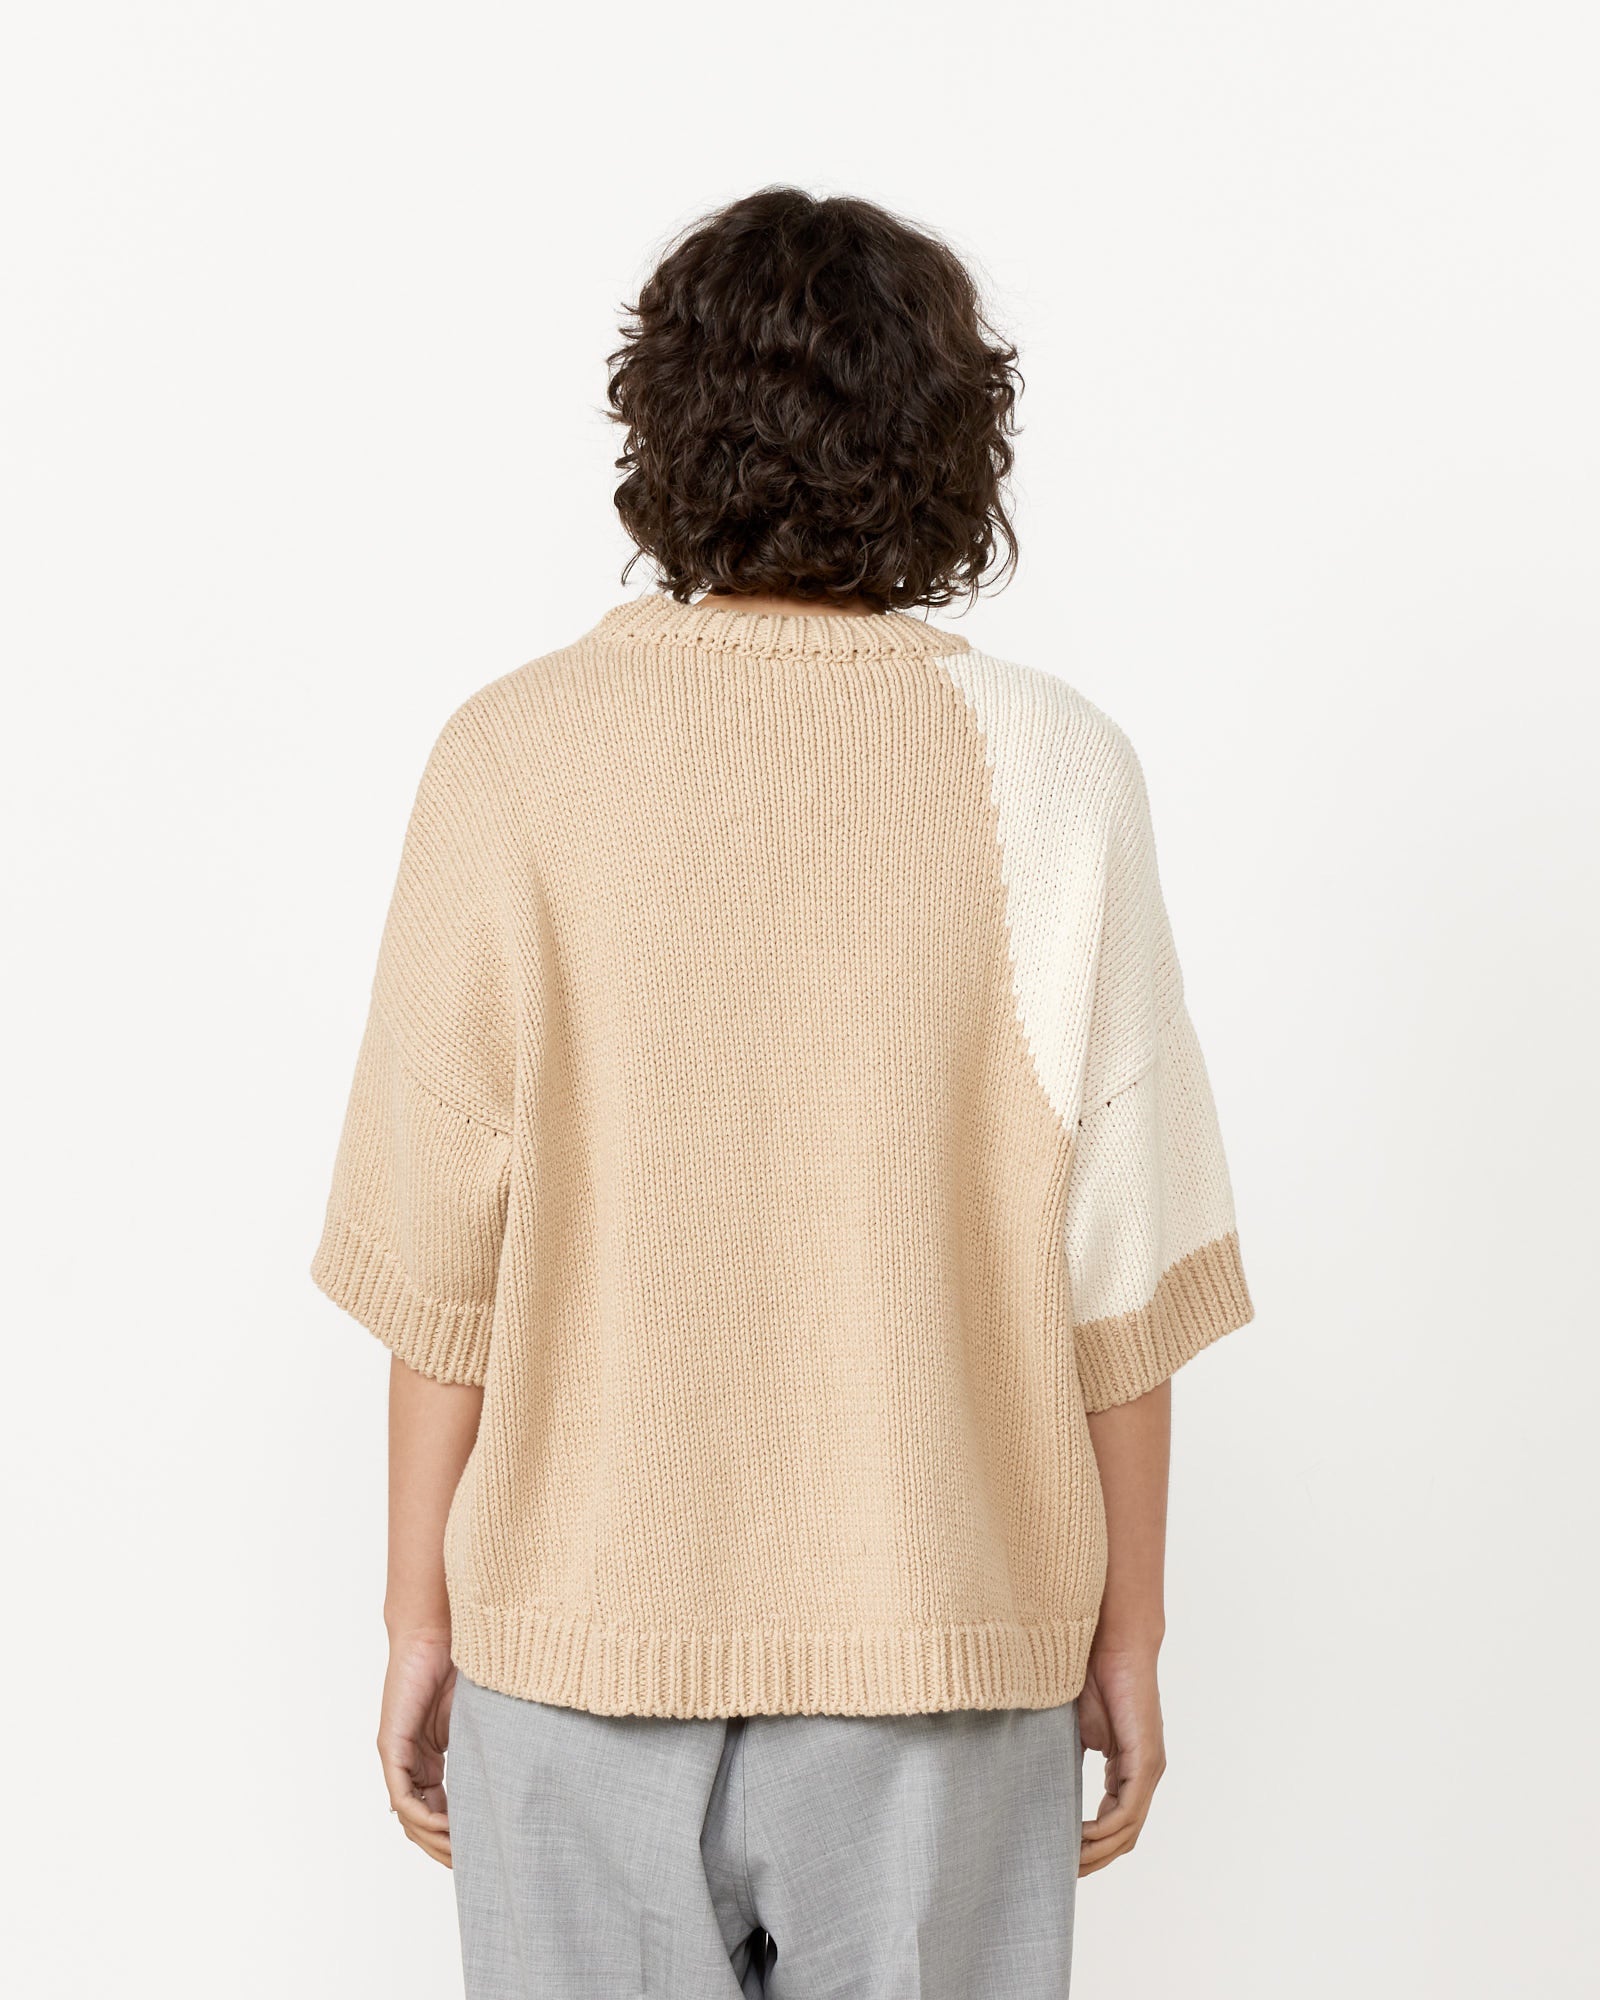 Cotton Sweater in Taupe Bicolor